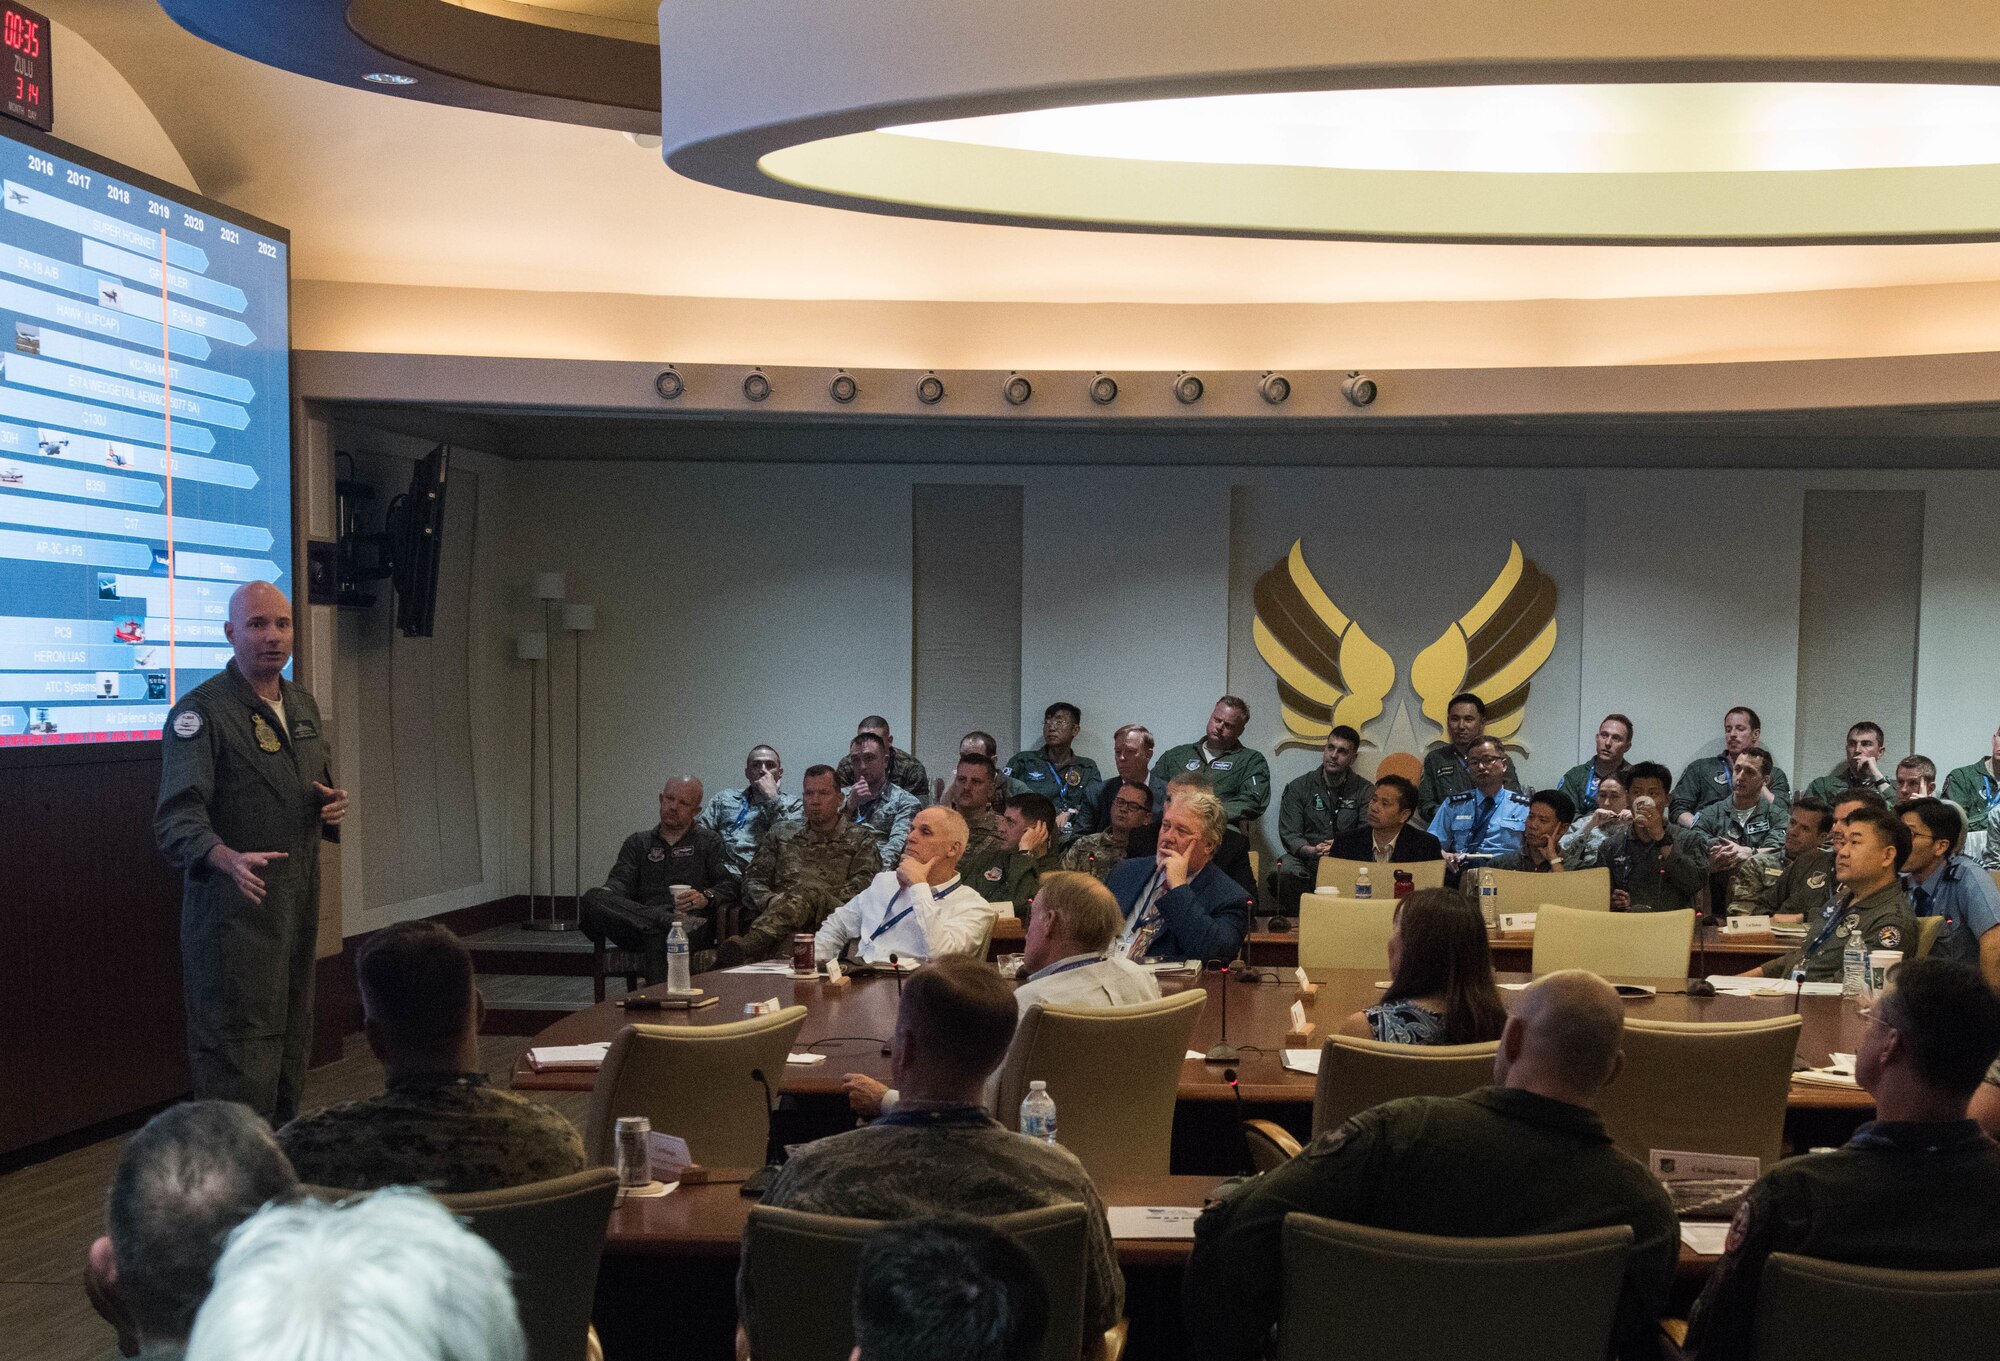 Royal Australian Air Force GPCAPT. John Haly, Director, Air Combat Transition Office, gives a country update briefing during the Pacific F-35 Users Group Conference at Headquarters Pacific Air Forces, Joint Base Pearl Harbor-Hickam, Hawaii, March 13, 2019.